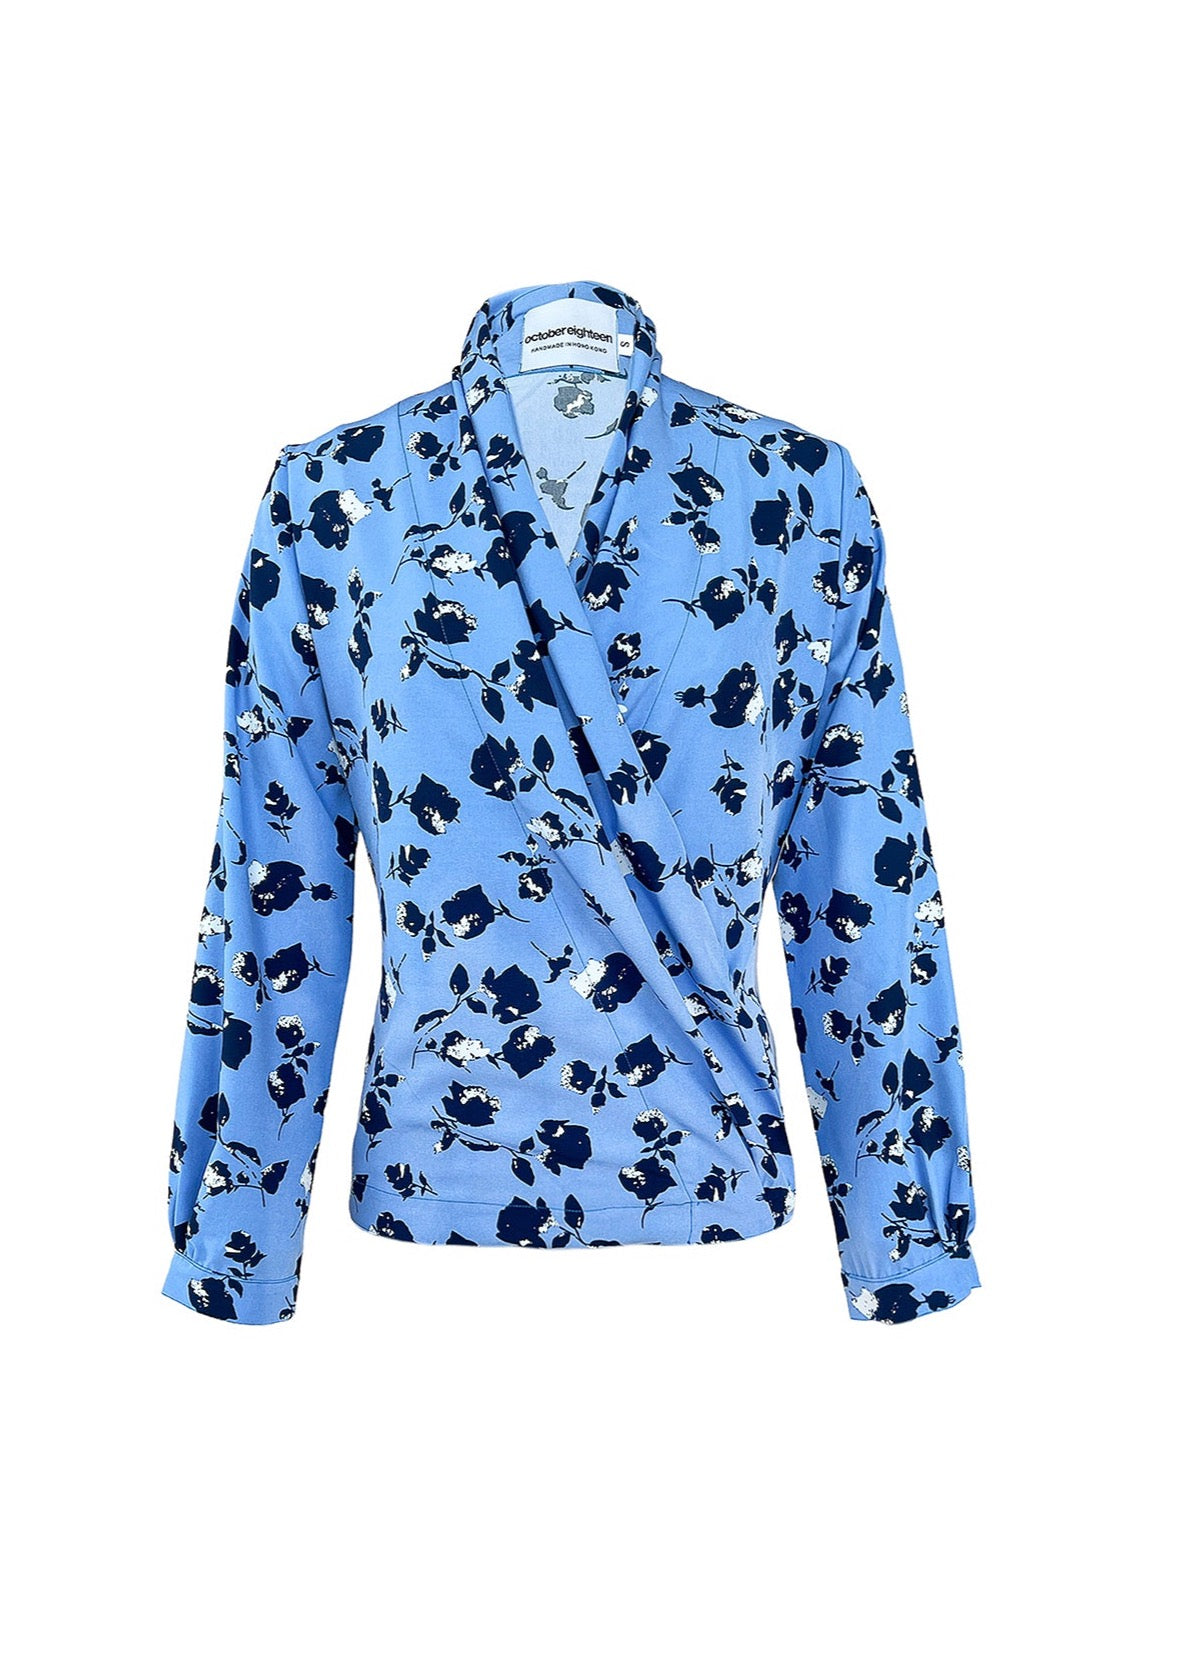 FLORENCE BLOUSE IN LIGHT BLUE FLORAL